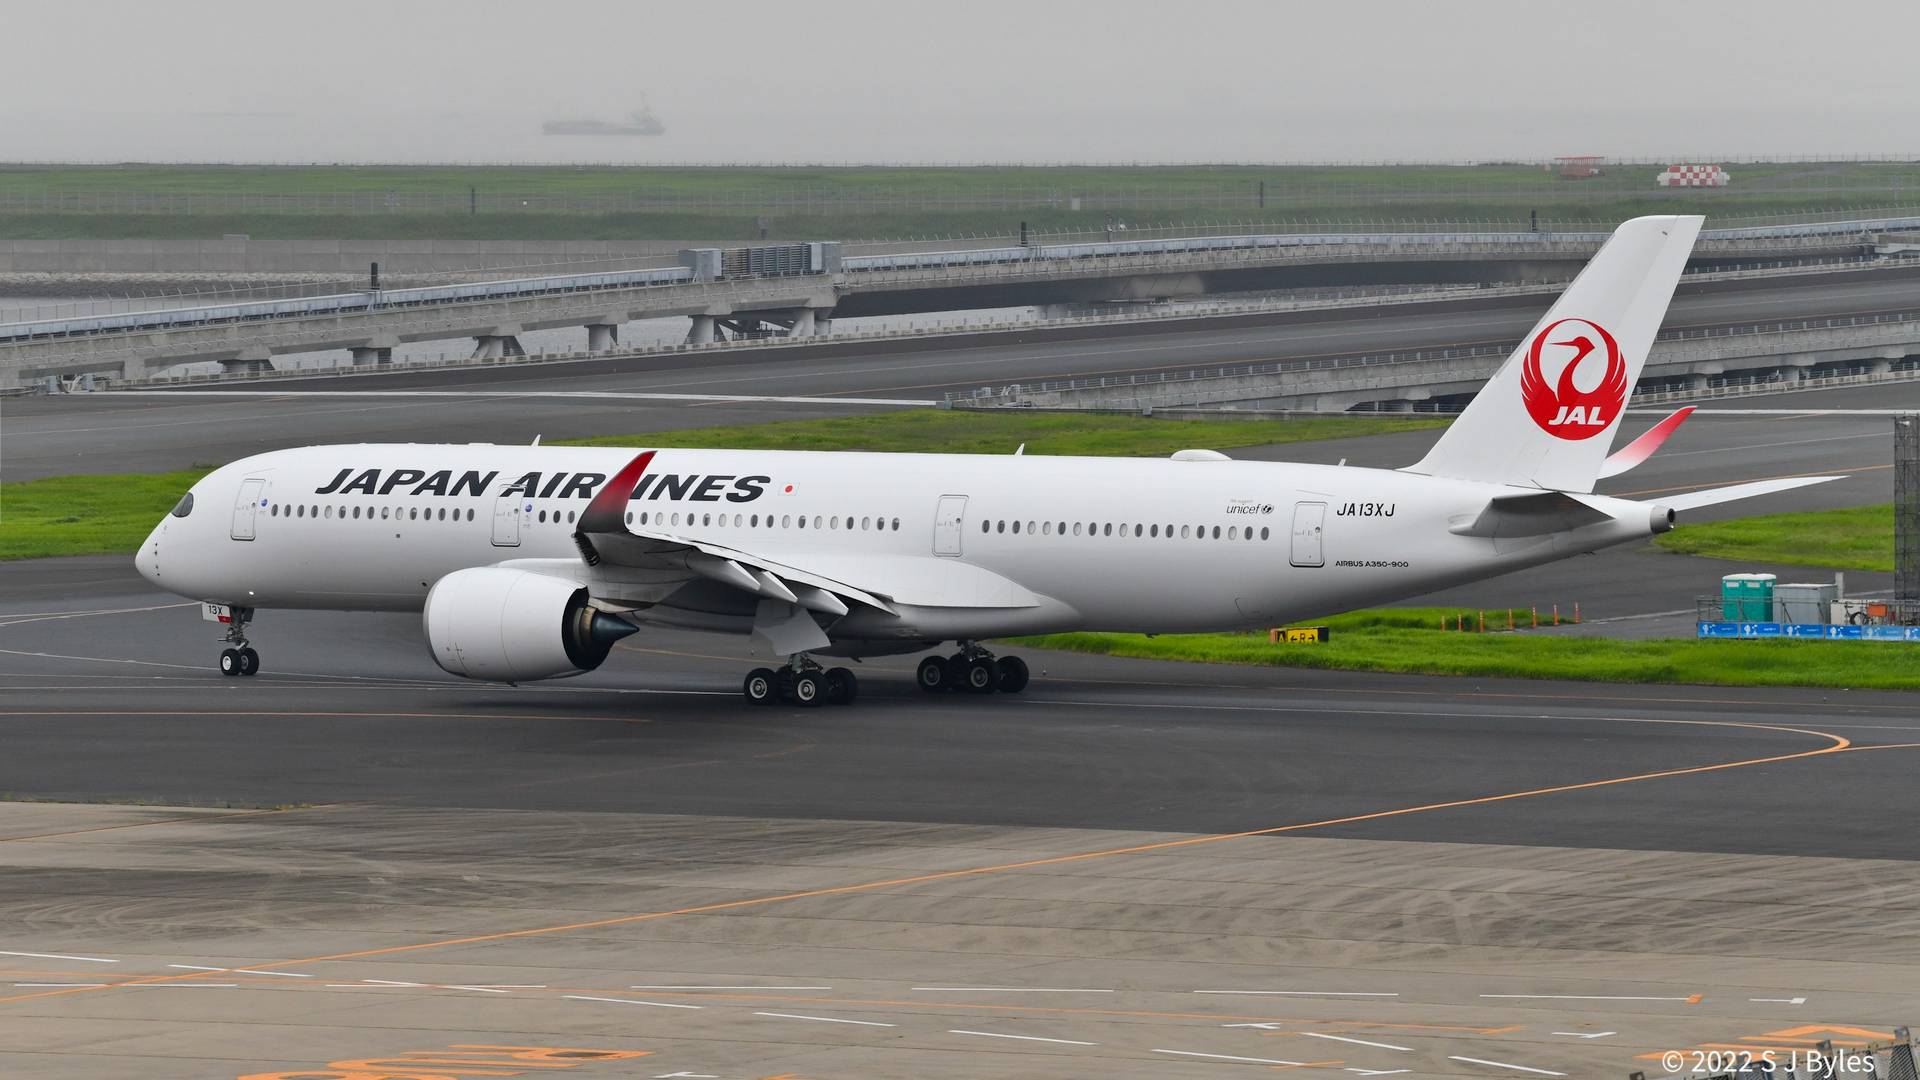 BREAKING: JAL Airbus A350 On Fire After Hitting Other Aircraft